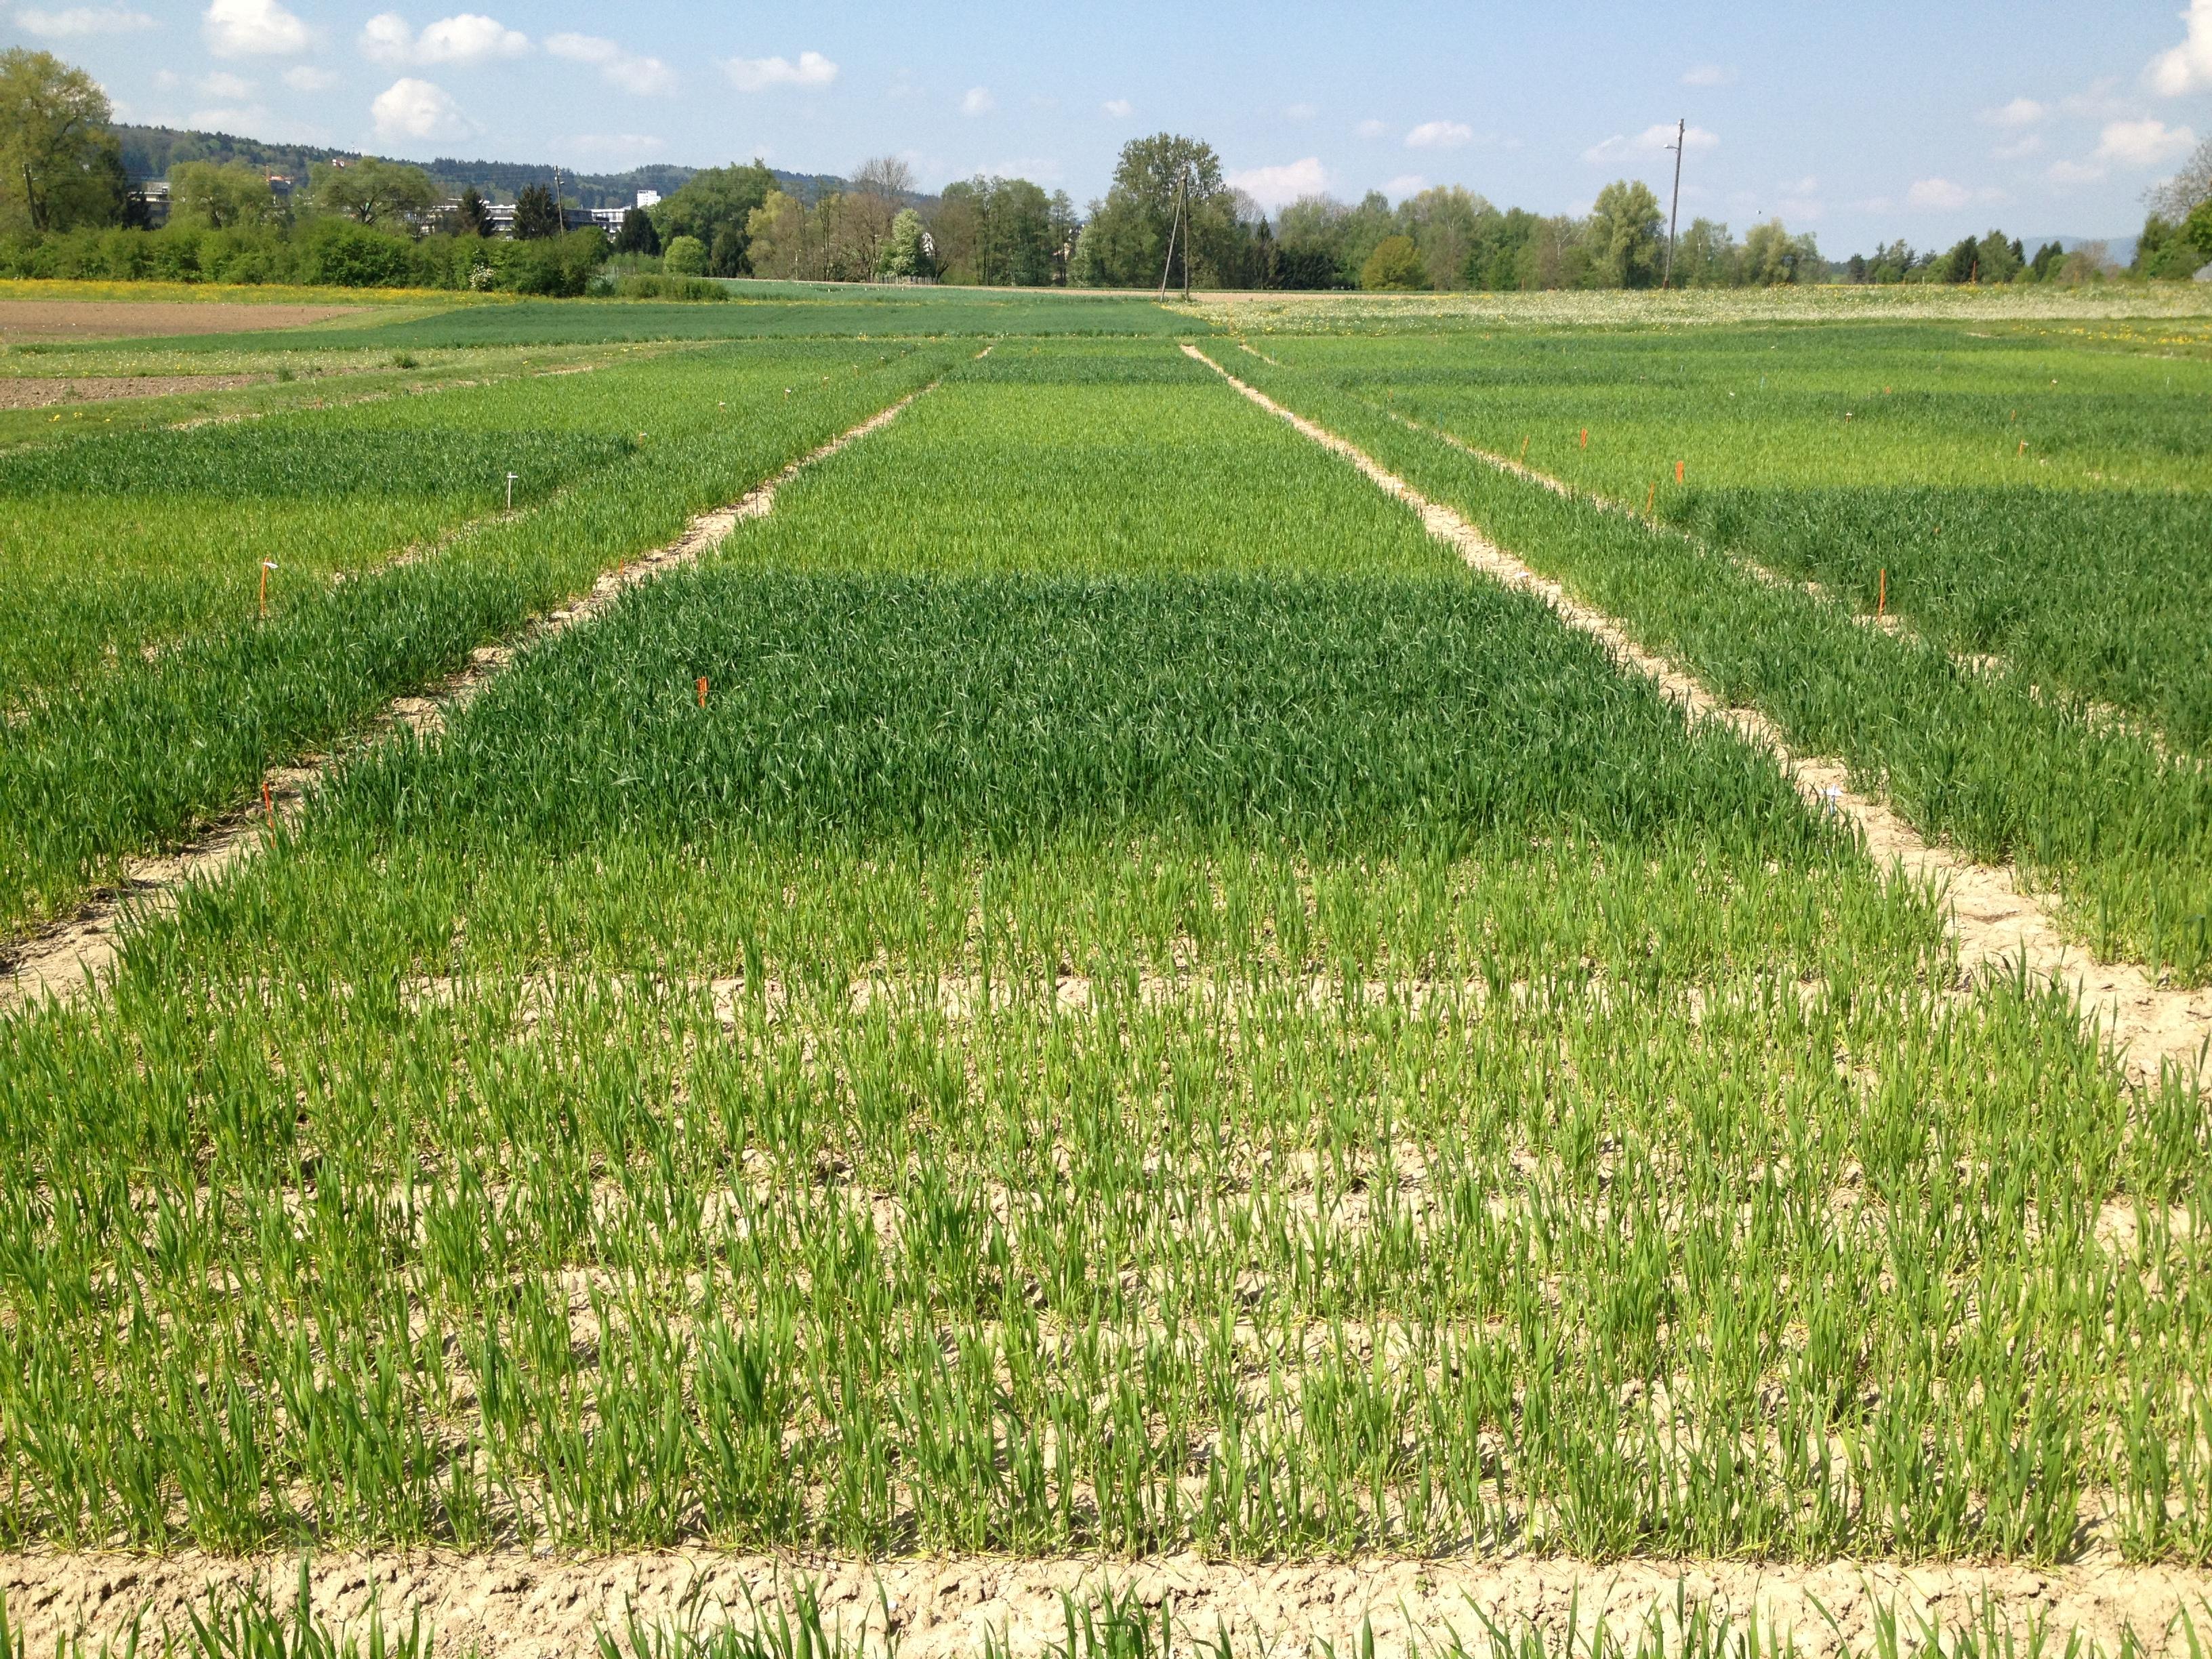 Young winter wheat at ZOFE long-term field trial in Reckenholz, with varying growth depending on agricultural practices